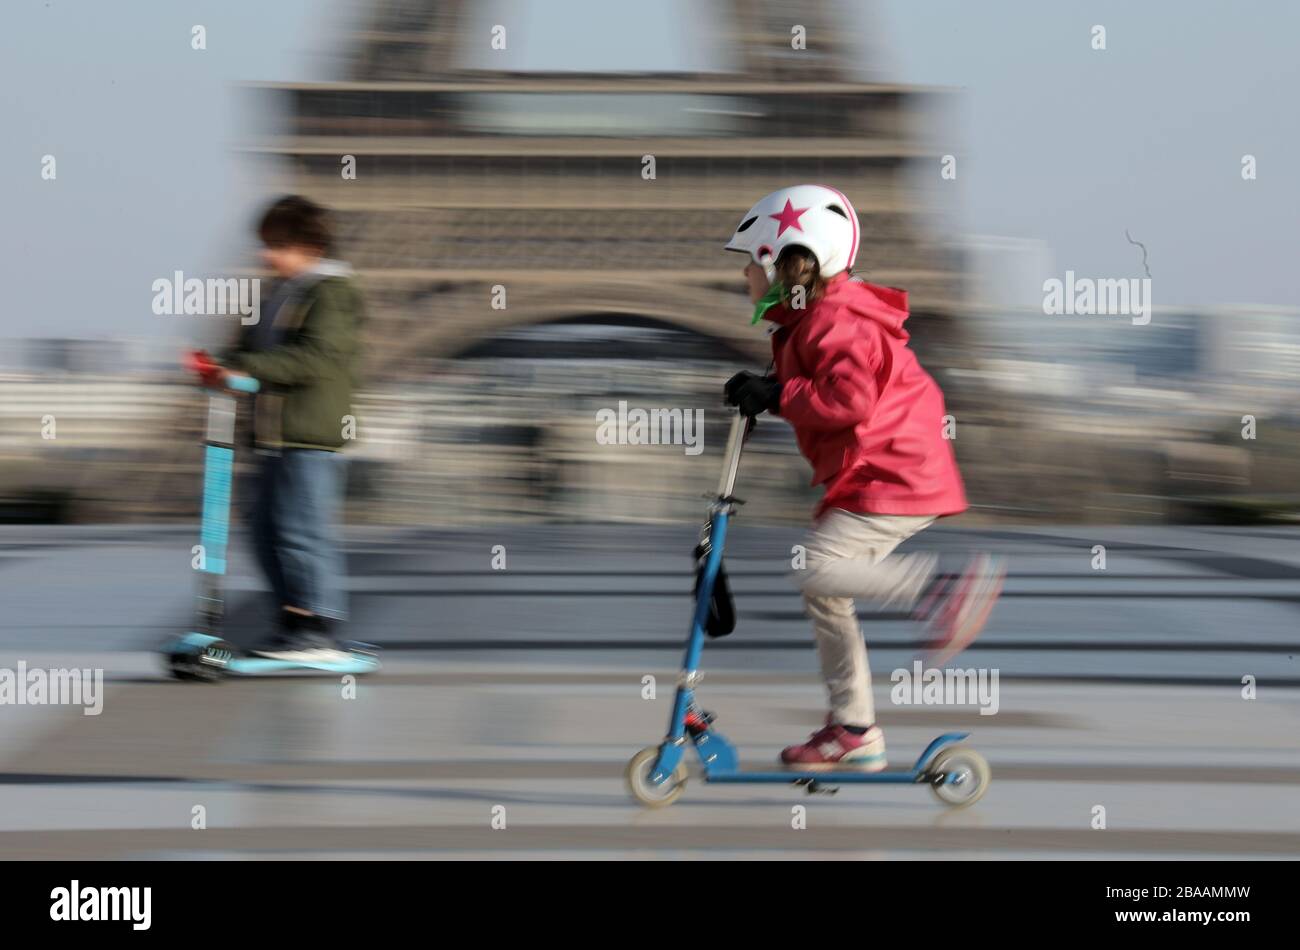 Paris, France. 26th Mar, 2020. Children ride their scooters in front of the Eiffel Tower in Paris, France on Thursday, March 26, 2020. French authorities tightened lockdown rules on physical exercise today limiting outings to one hour maximum as the coronavirus epidemic continues to spread in the country with 1,331 dead, including 186 in past 24 hours. Photo by Eco Clement/UPI Credit: UPI/Alamy Live News Stock Photo